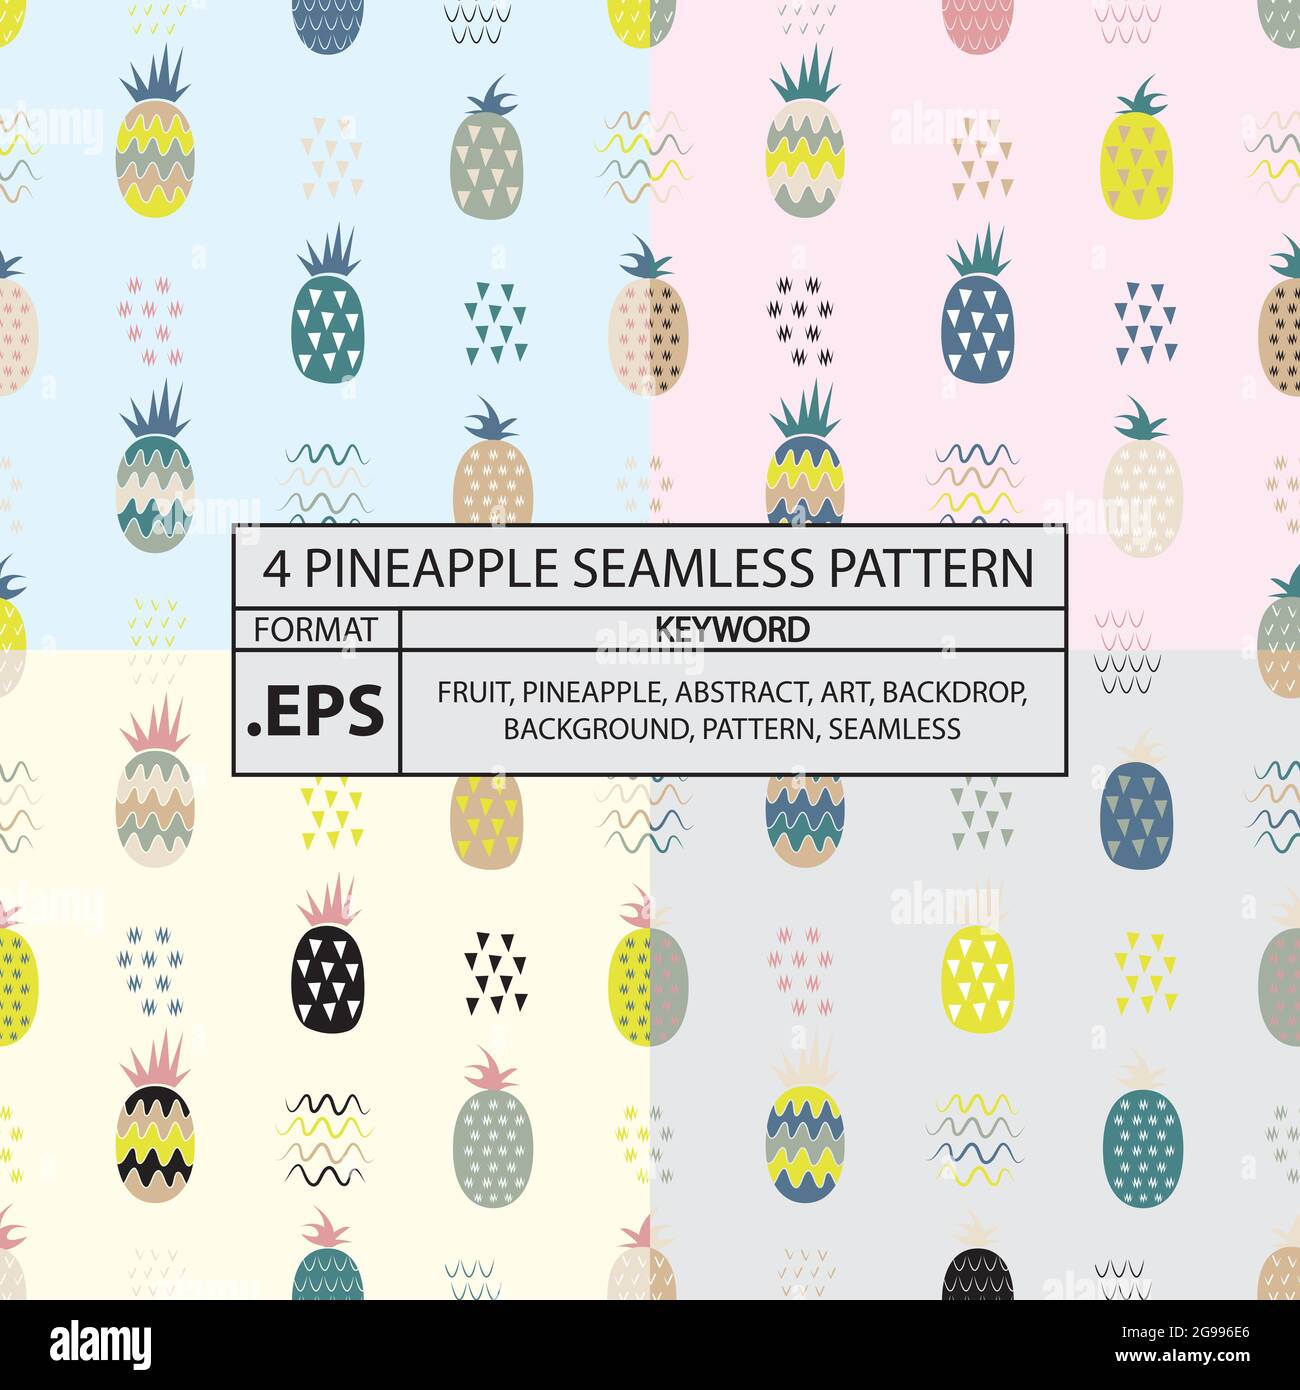 4 PINEAPPLE SEAMLESS PATTERN. GET IT NOW IN ONE PRICE Stock Vector